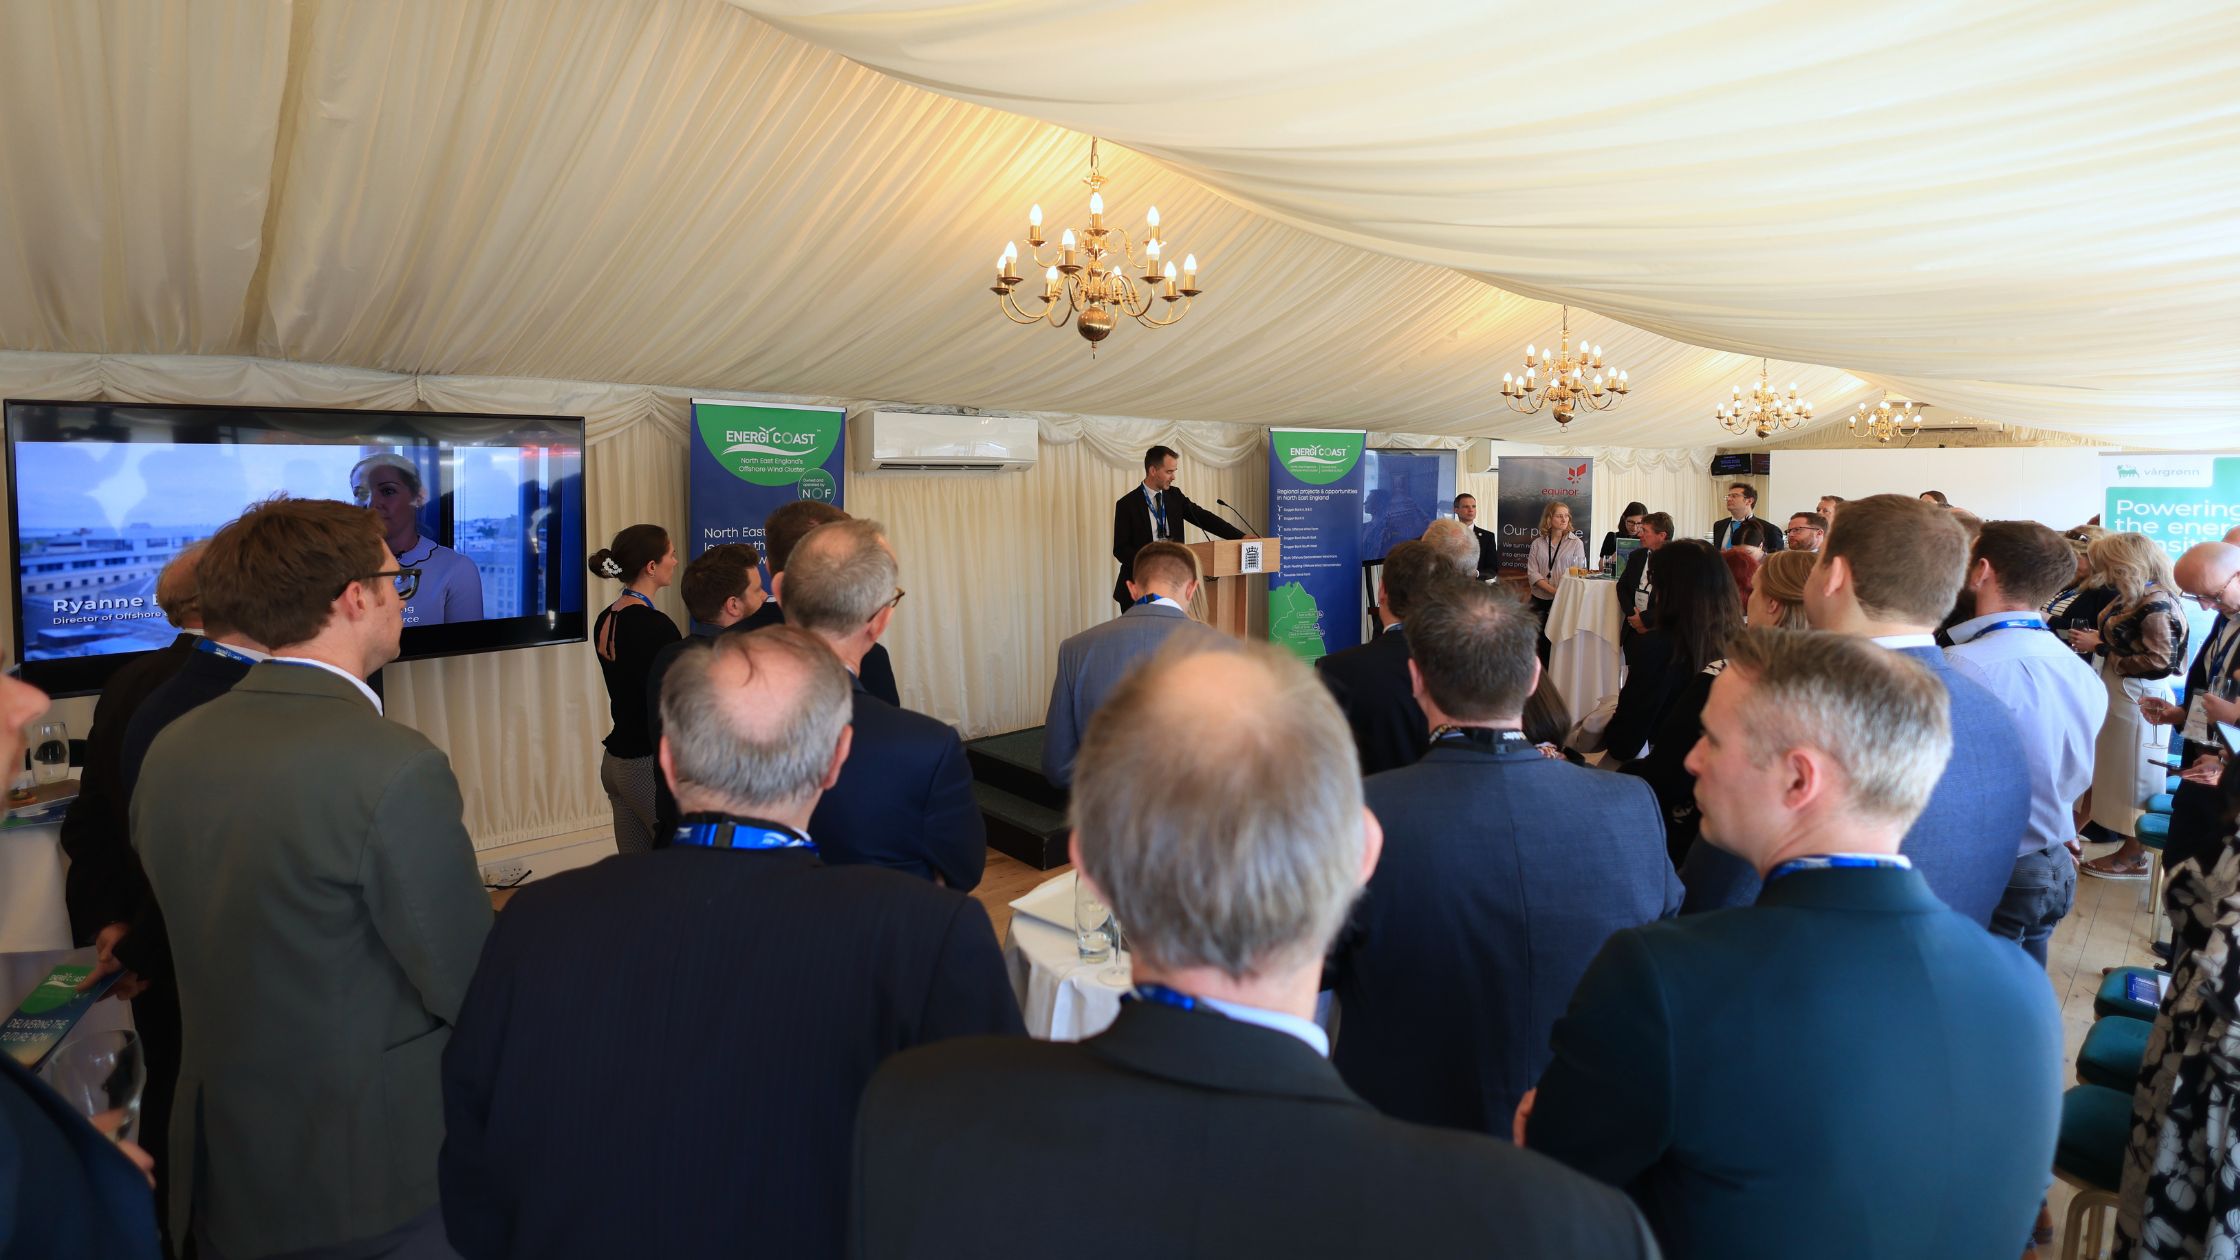 House of Commons Event